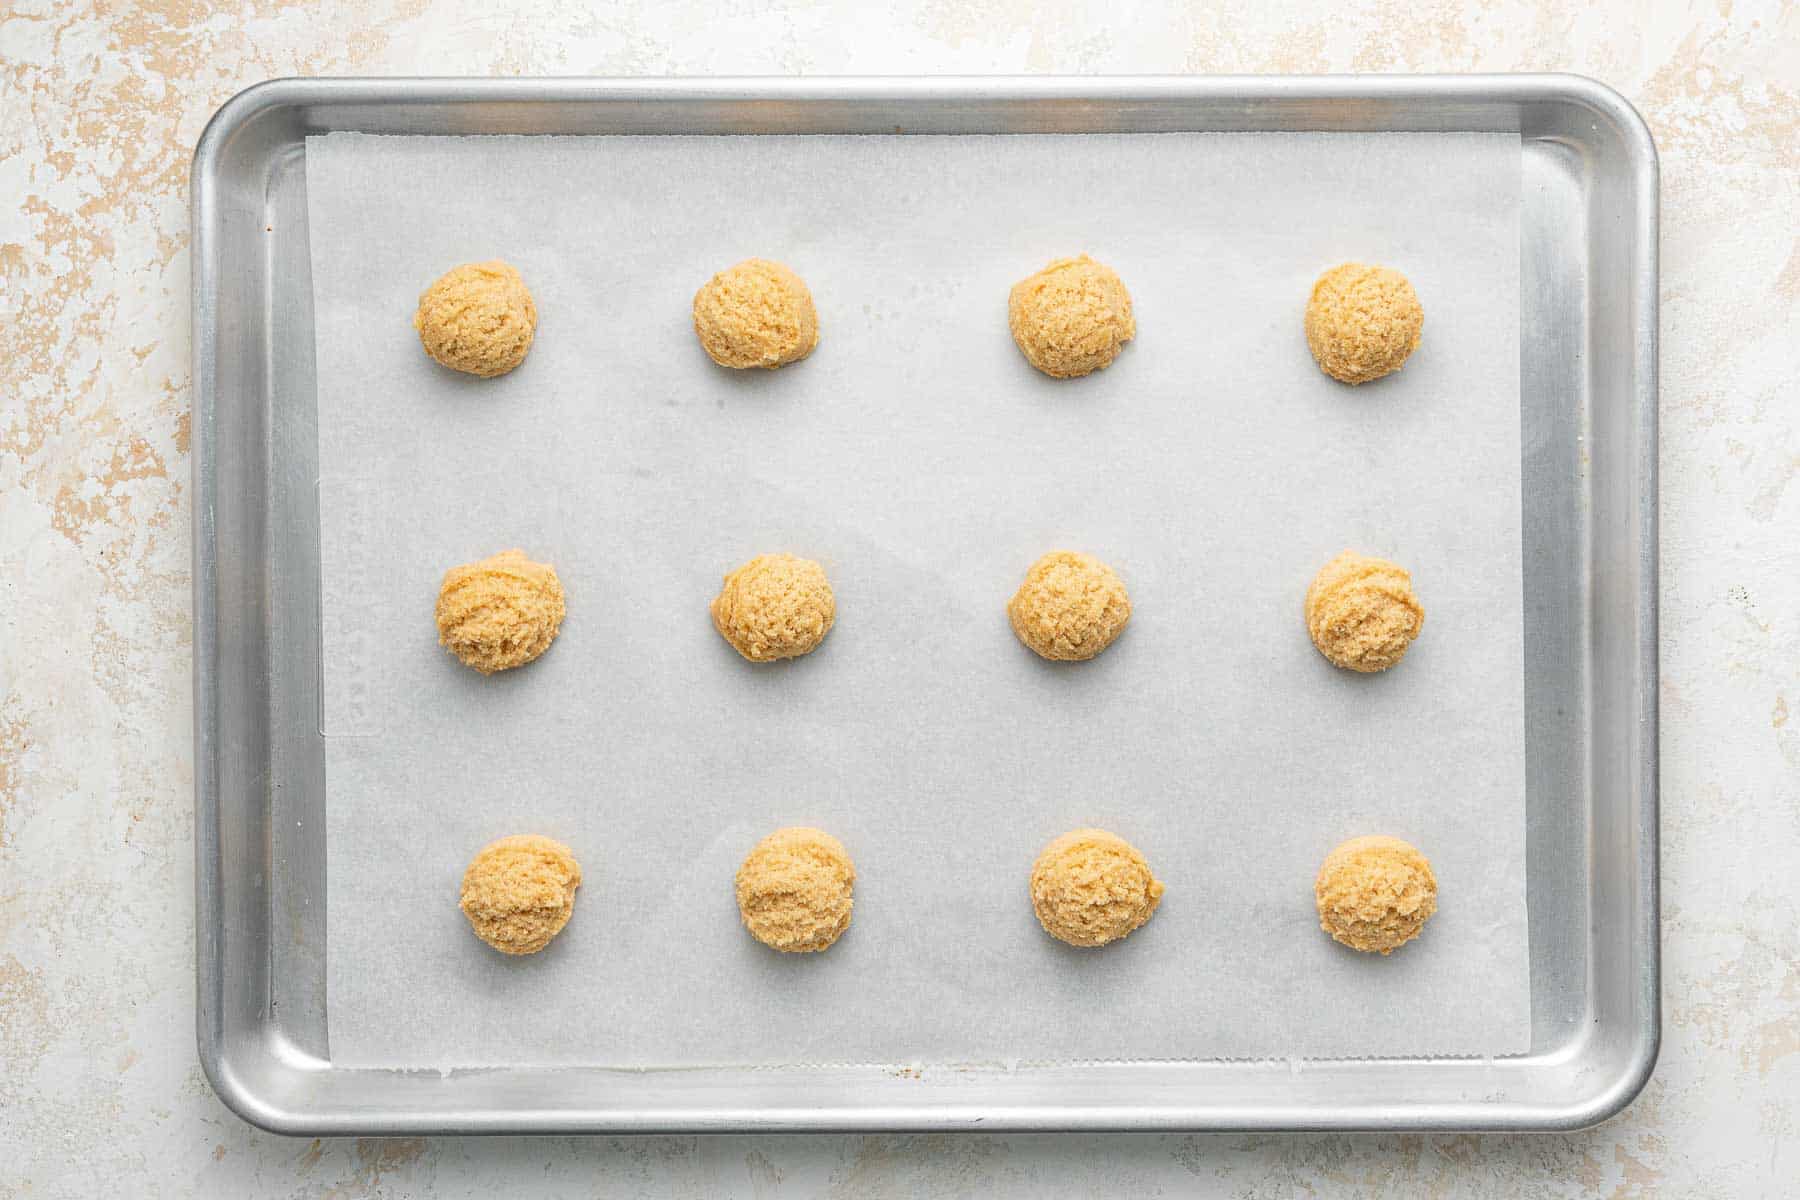 Twelve cookie dough balls on a baking sheet with parchment paper.